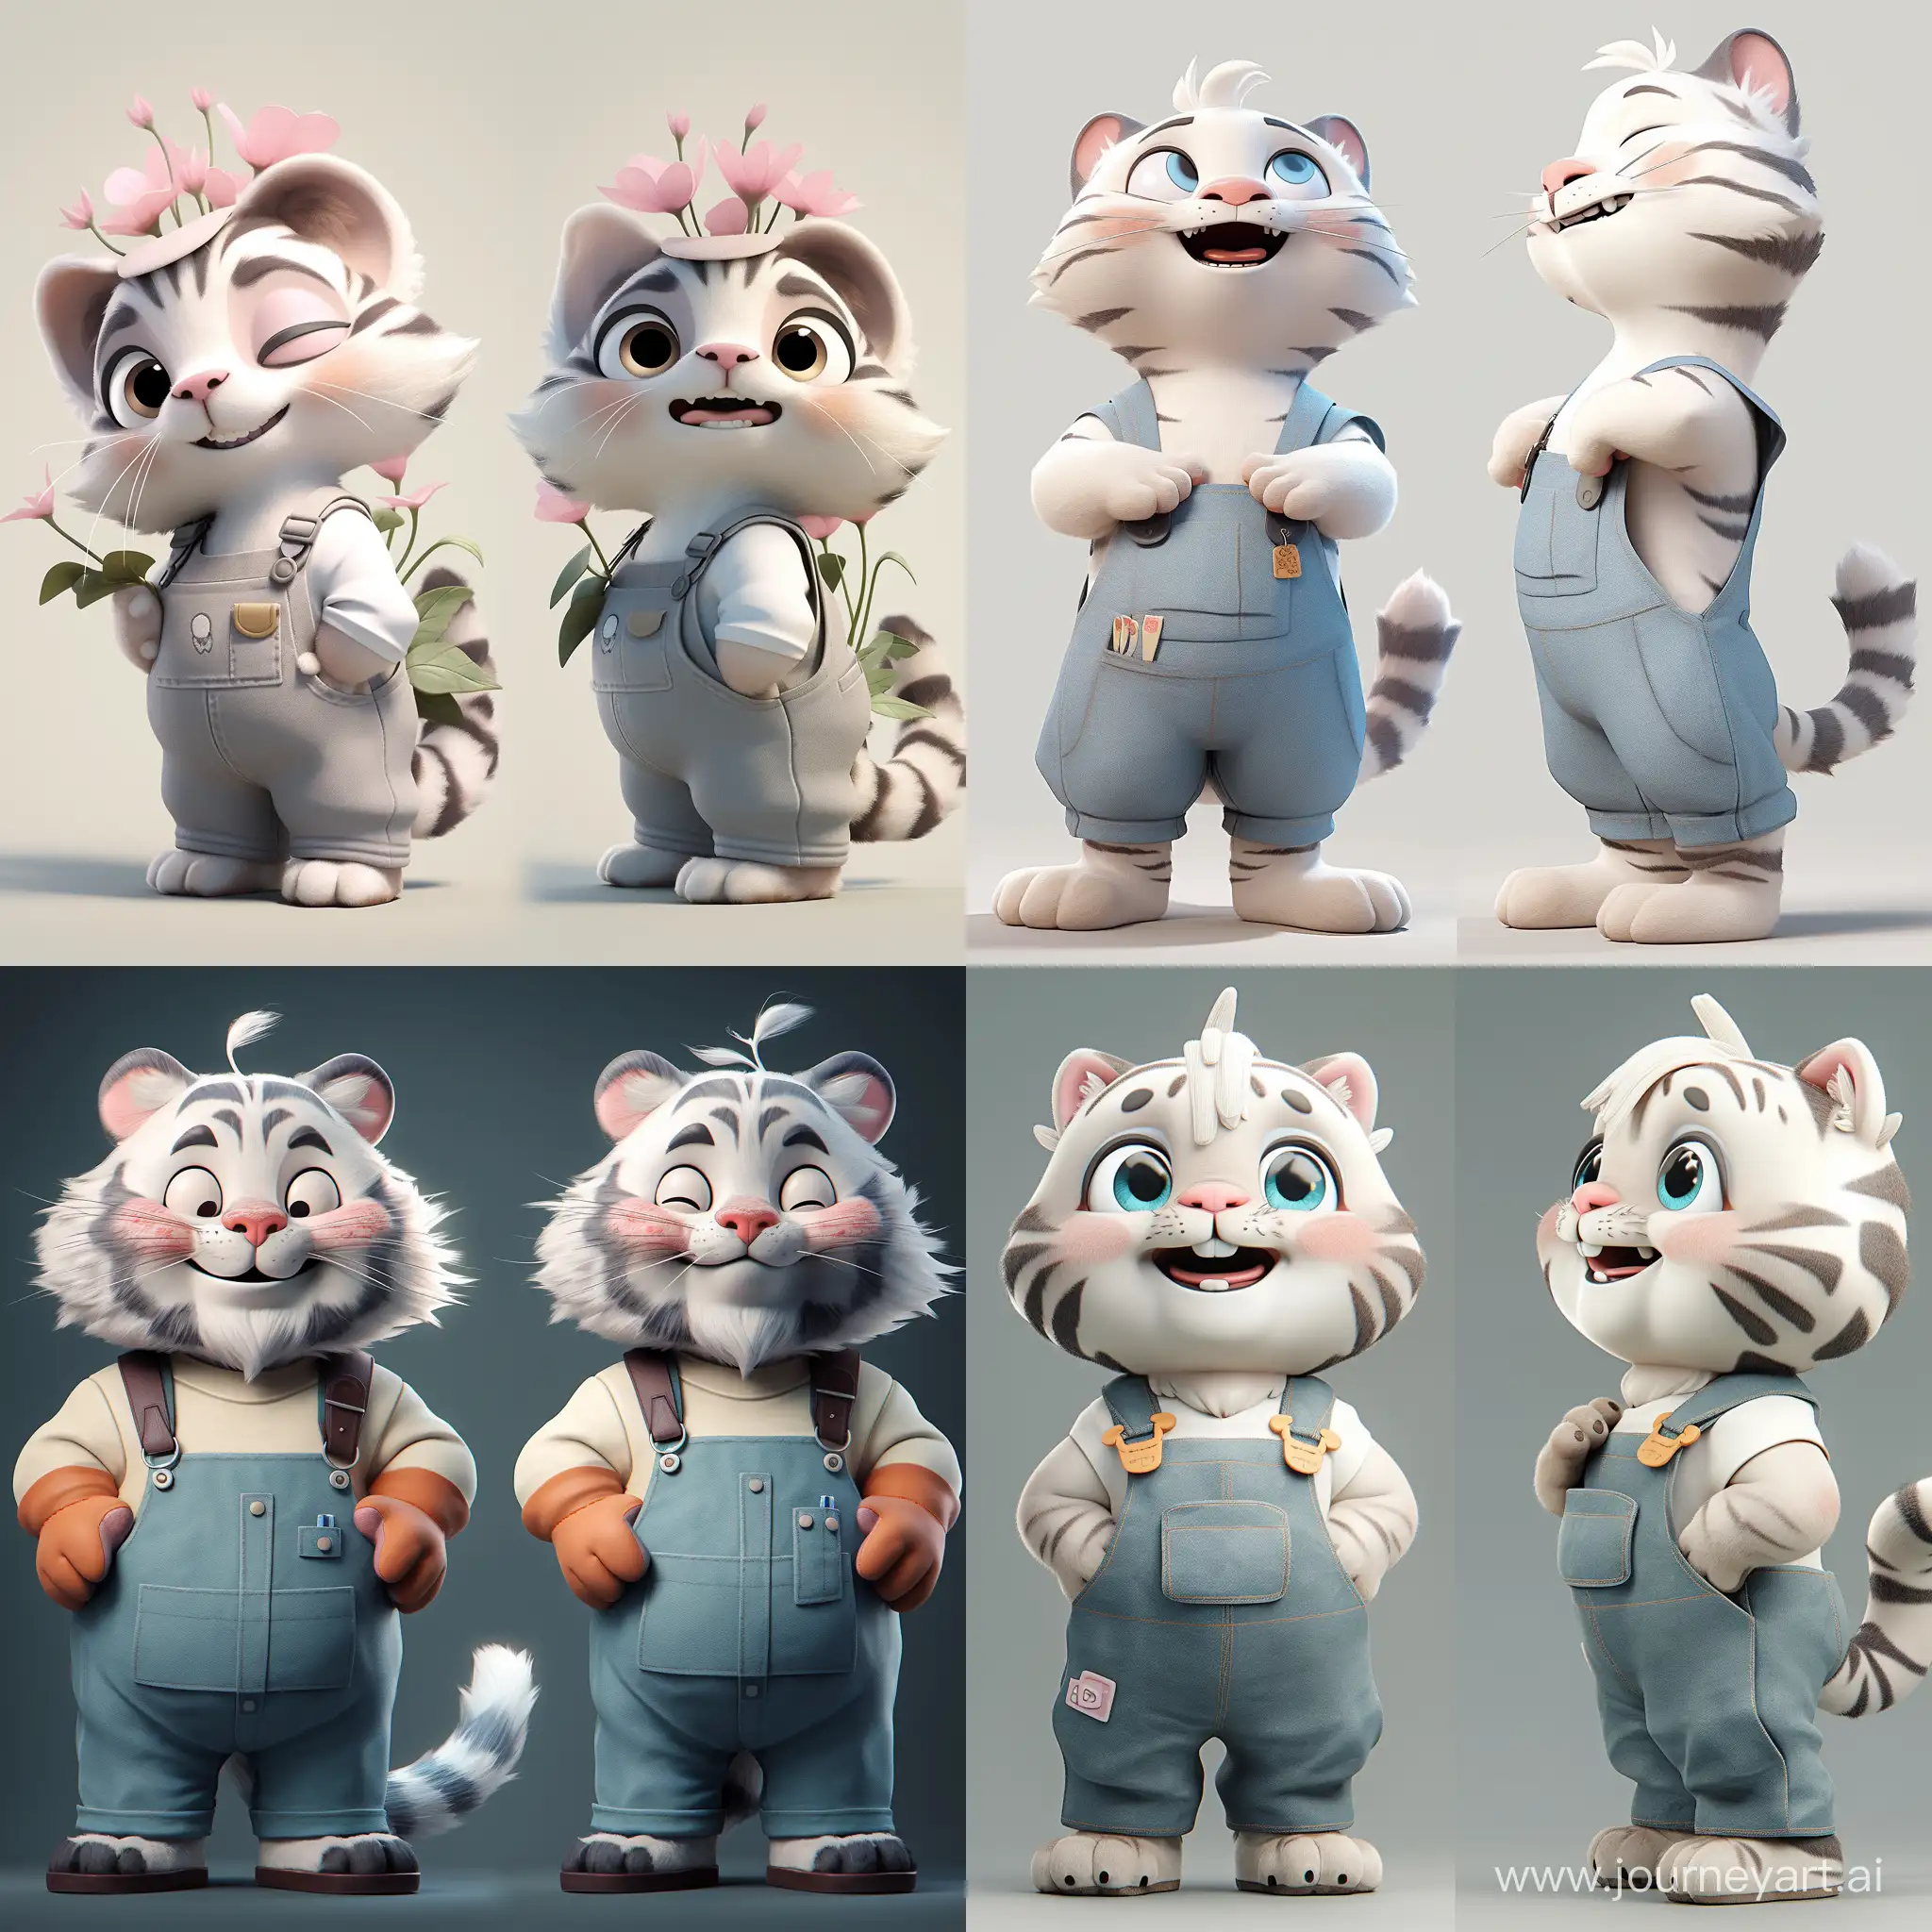 Adorable-White-Tiger-in-Overalls-Waving-Bubble-Mart-Style